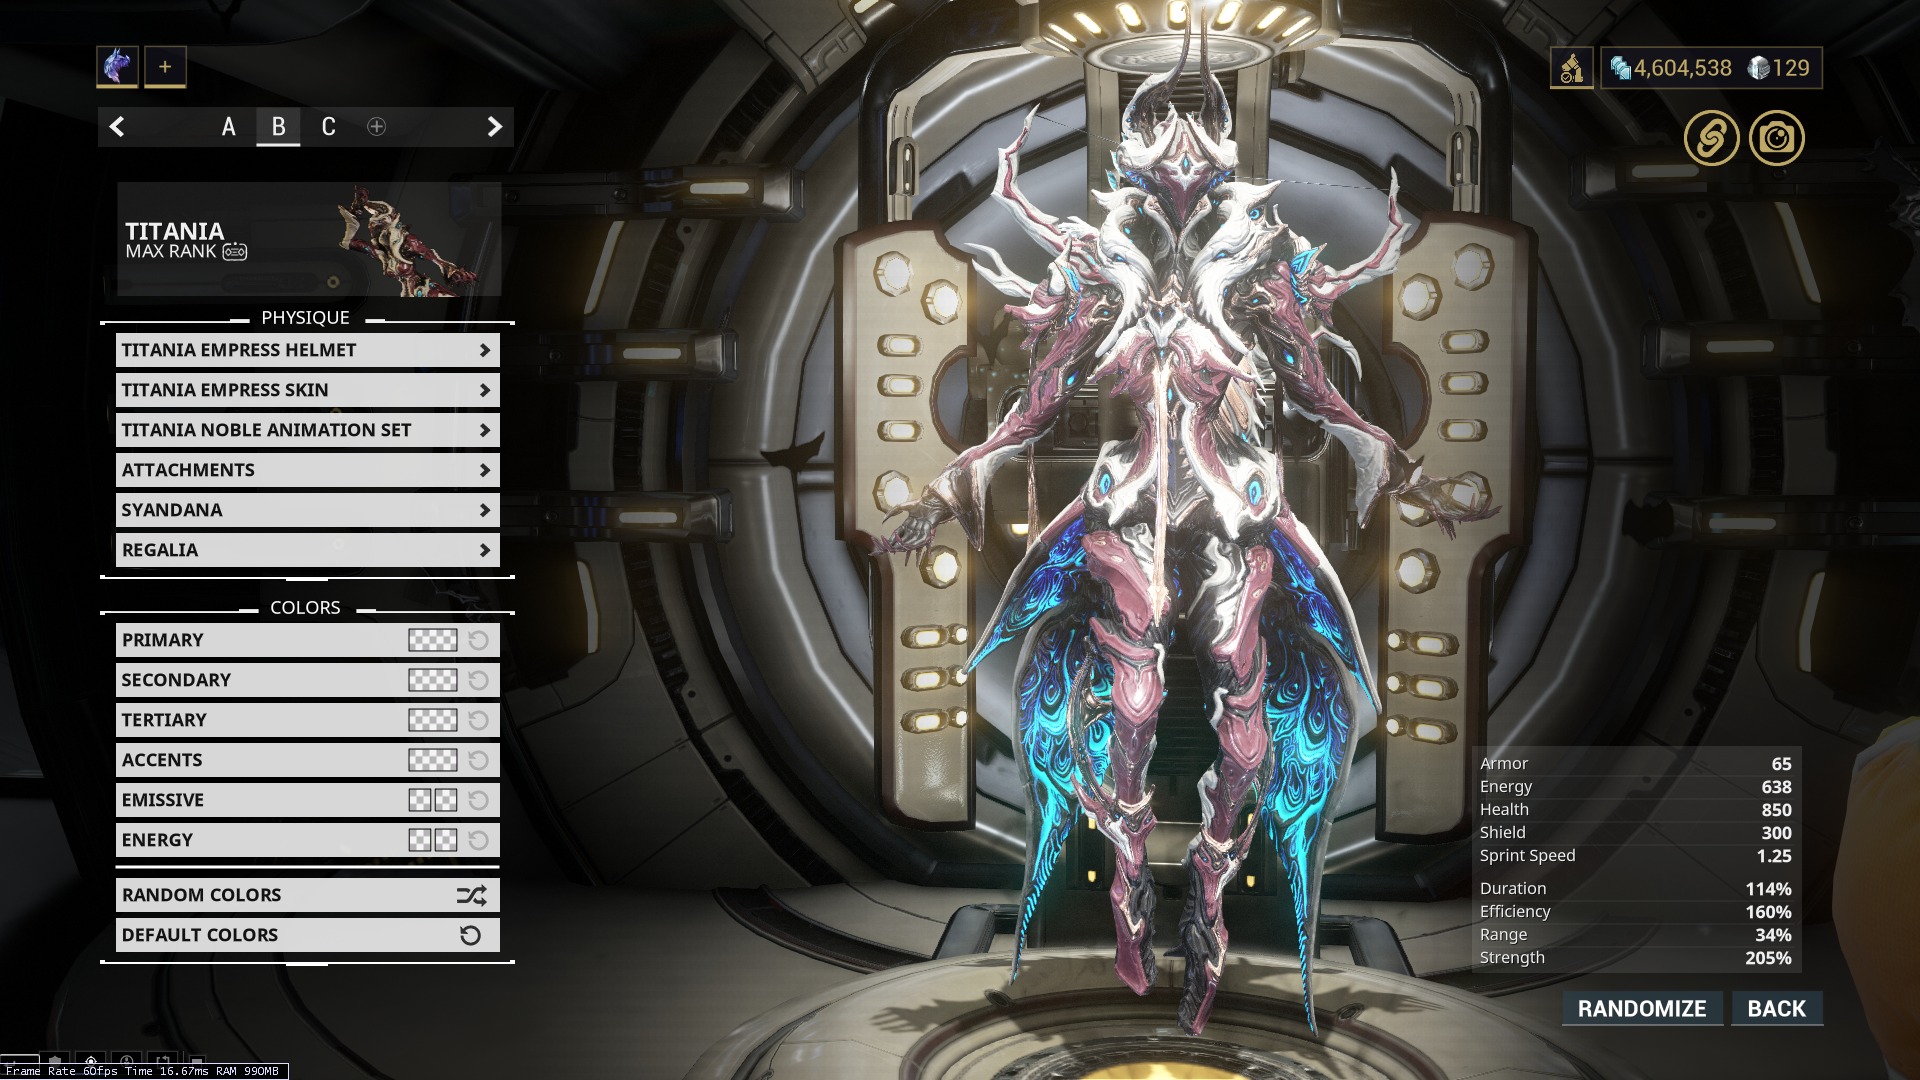 Screenshot of Warframe, showing the customisation screen for the Titania frame.